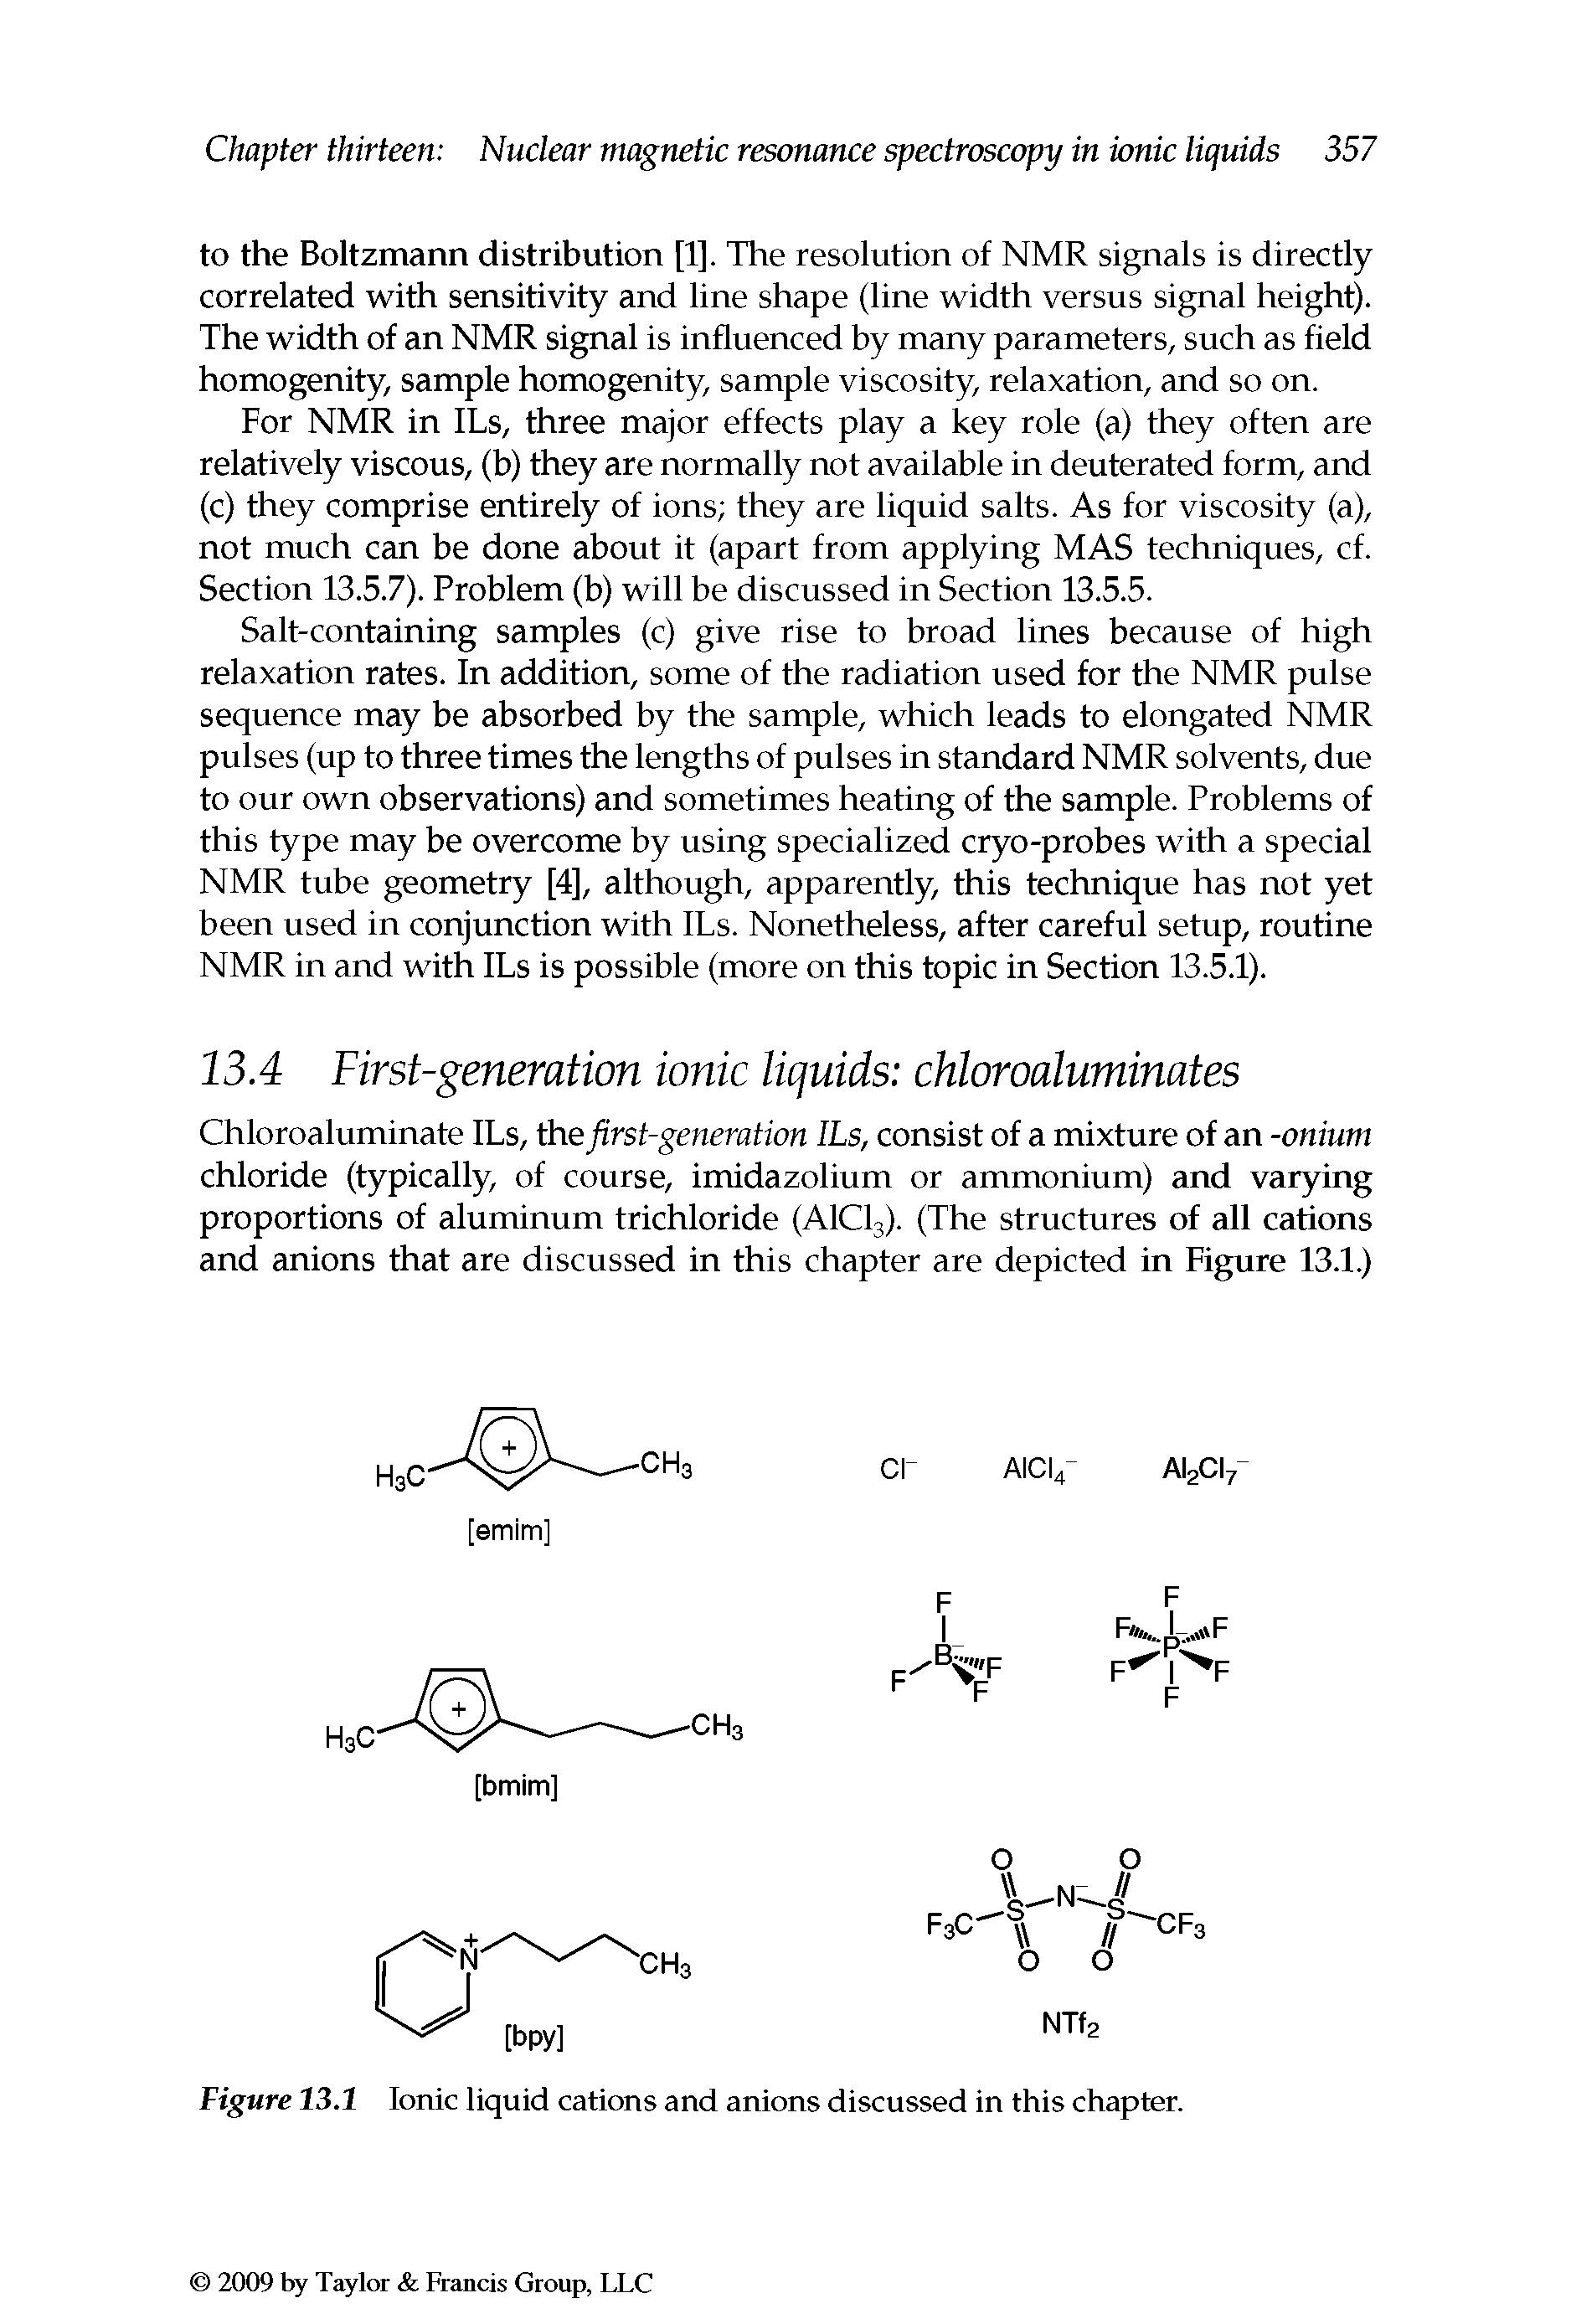 Figure 13.1 Ionic liquid cations and anions discussed in this chapter.